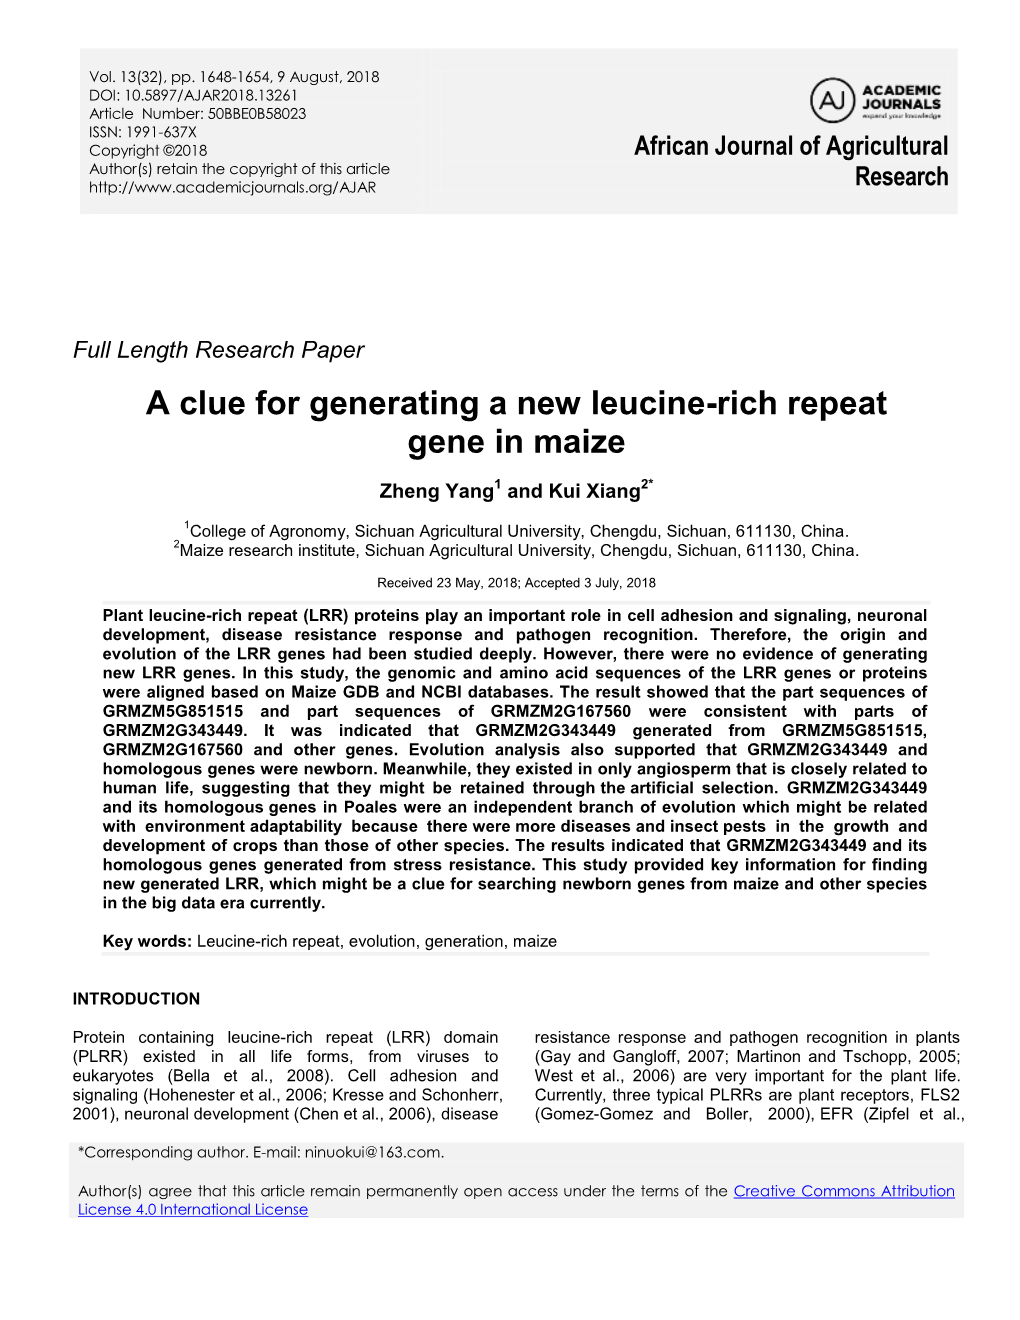 A Clue for Generating a New Leucine-Rich Repeat Gene in Maize